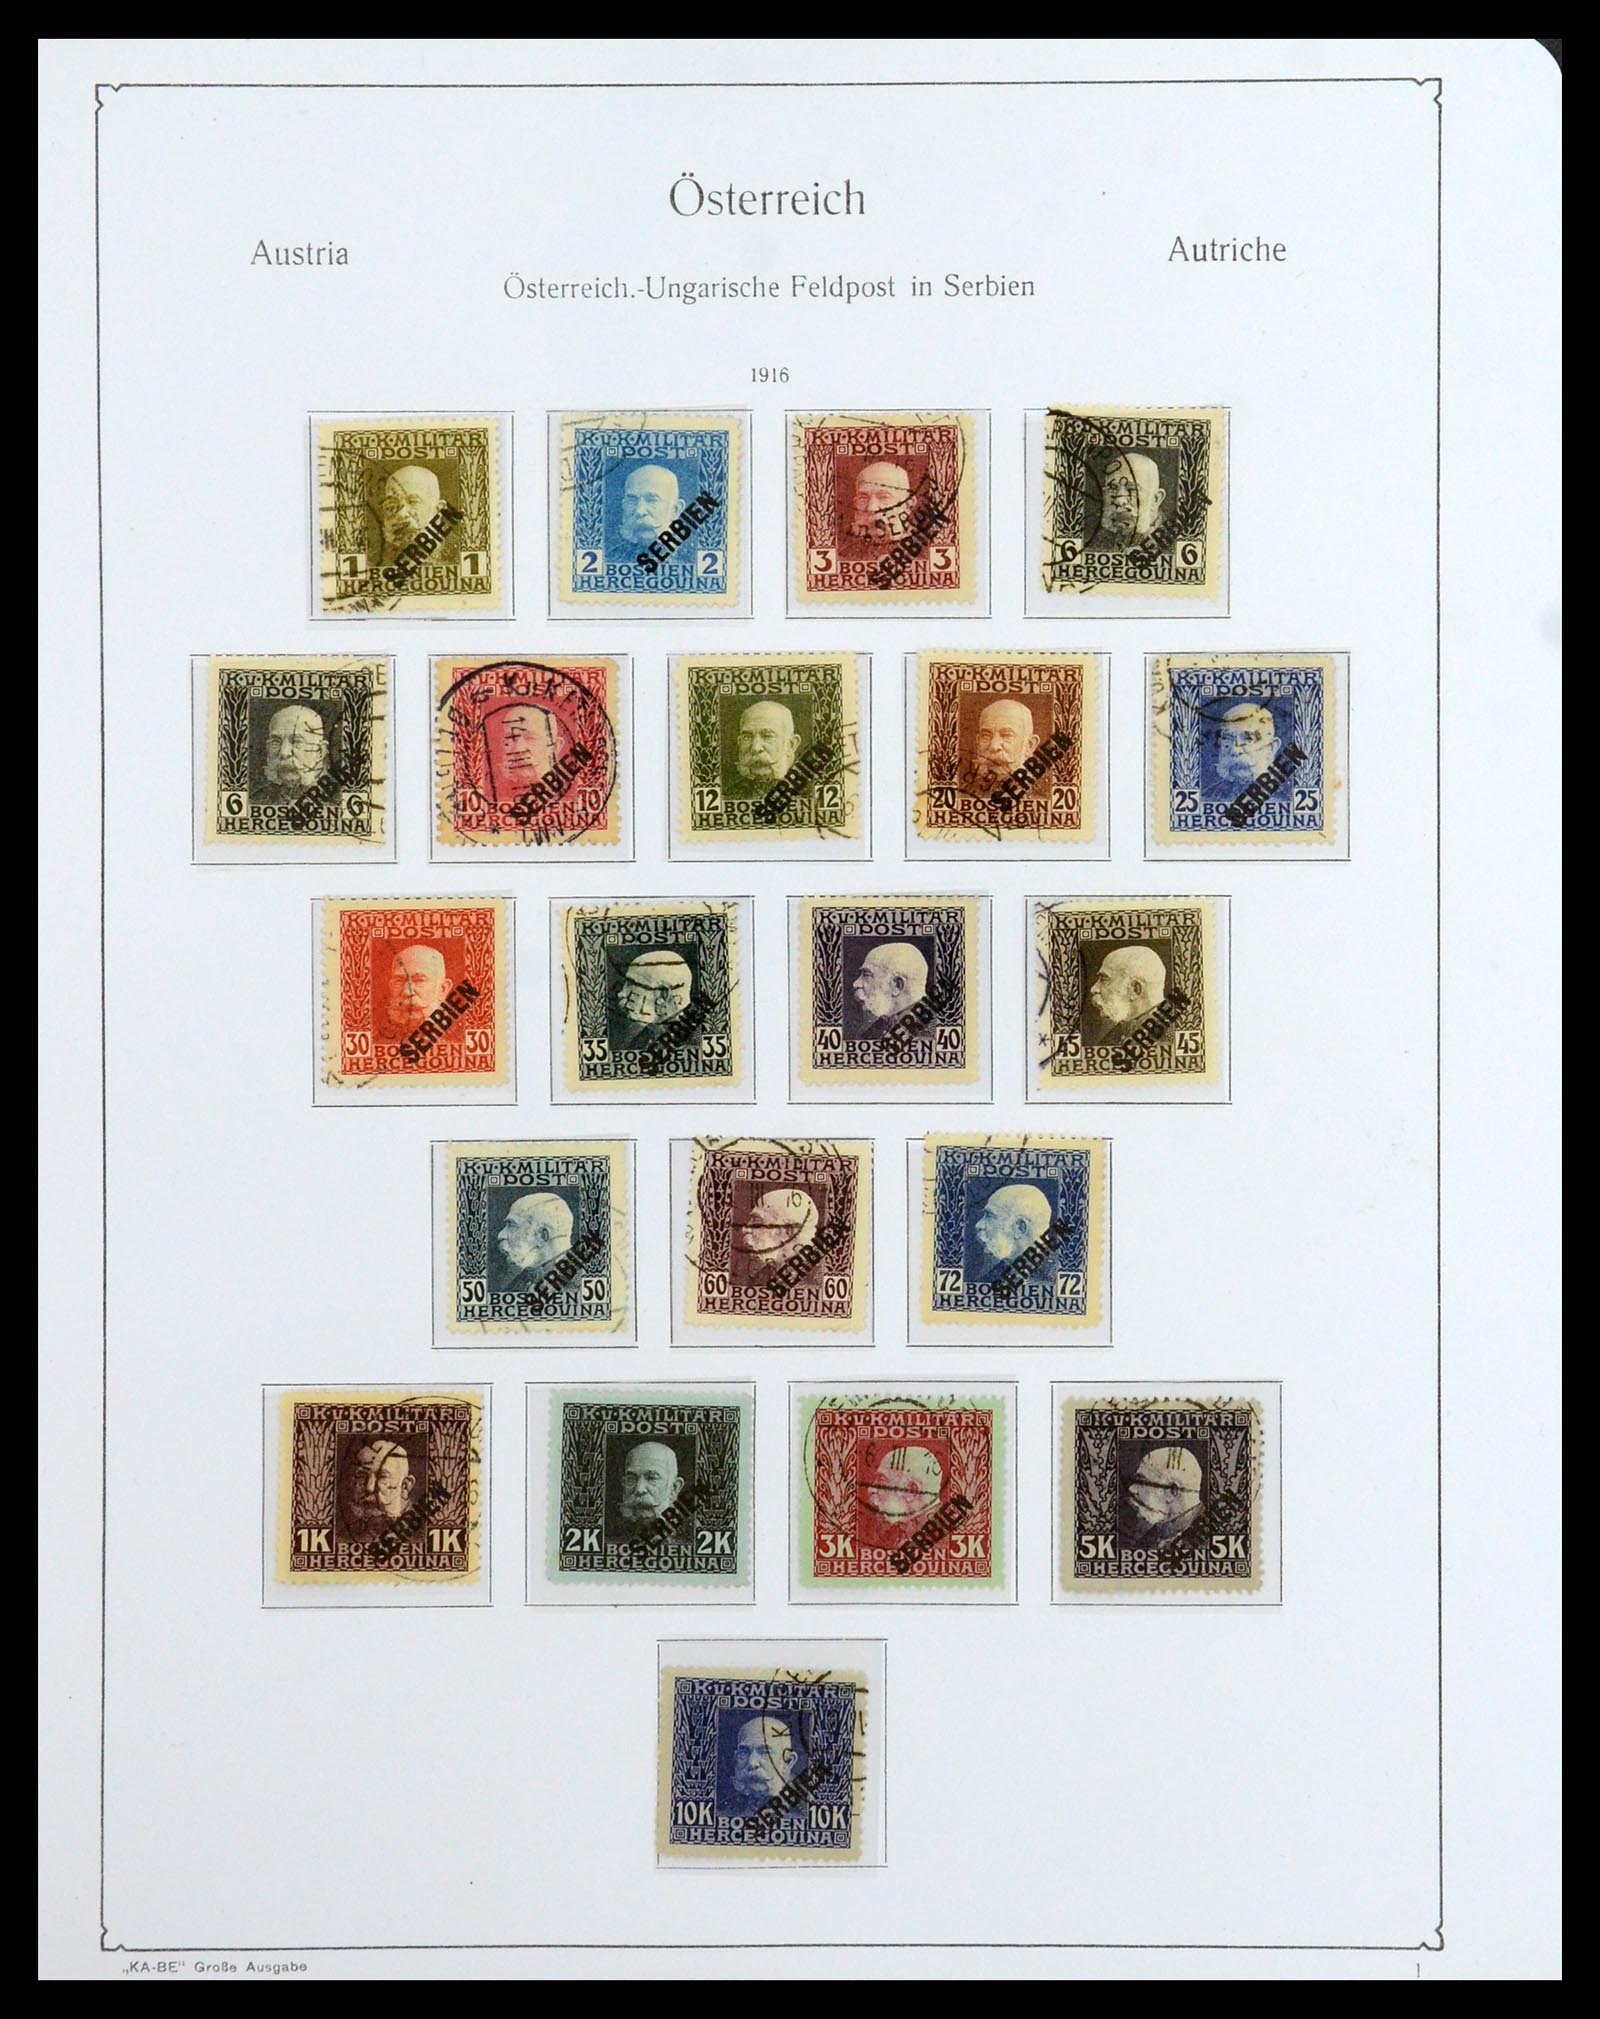 36364 038 - Stamp collection 36364 Austrian territories 1879-1918.